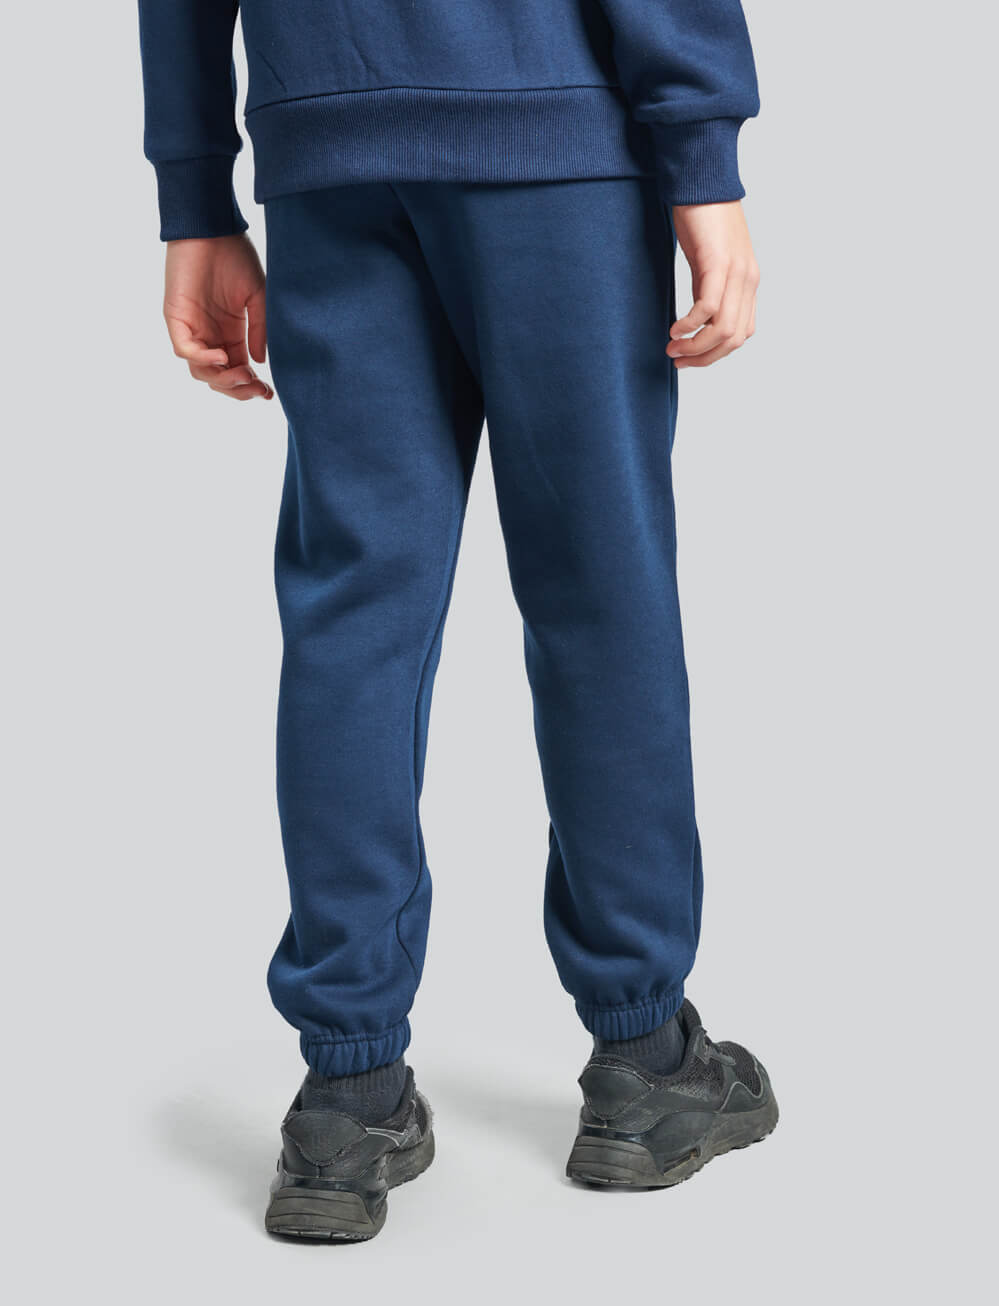 Official Arsenal Kids Joggers - Navy - The World Football Store